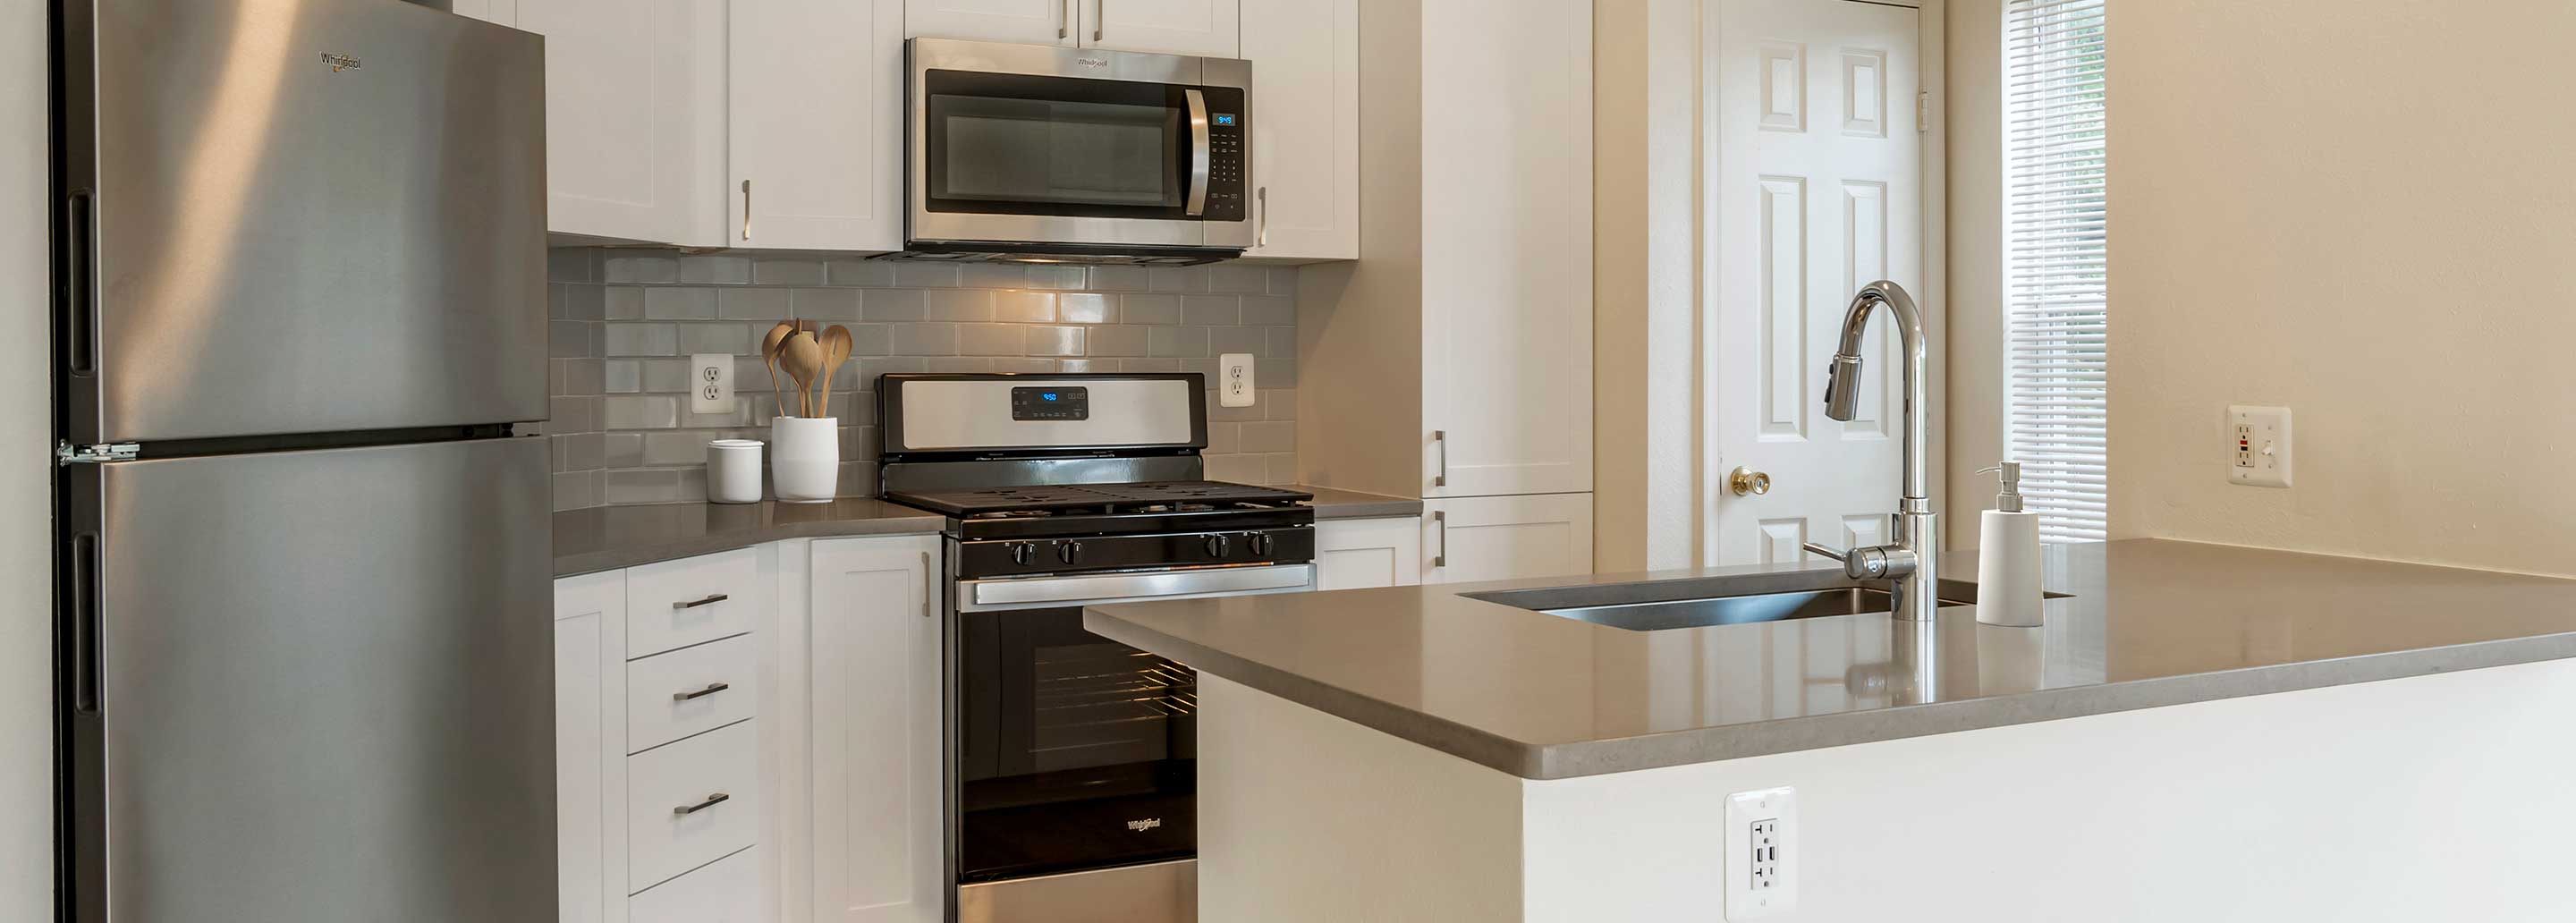 Newly renovated Finish Package V kitchens with white cabinetry, grey quartz countertops, stainless appliances, grey tile backsplash, and hard surface flooring